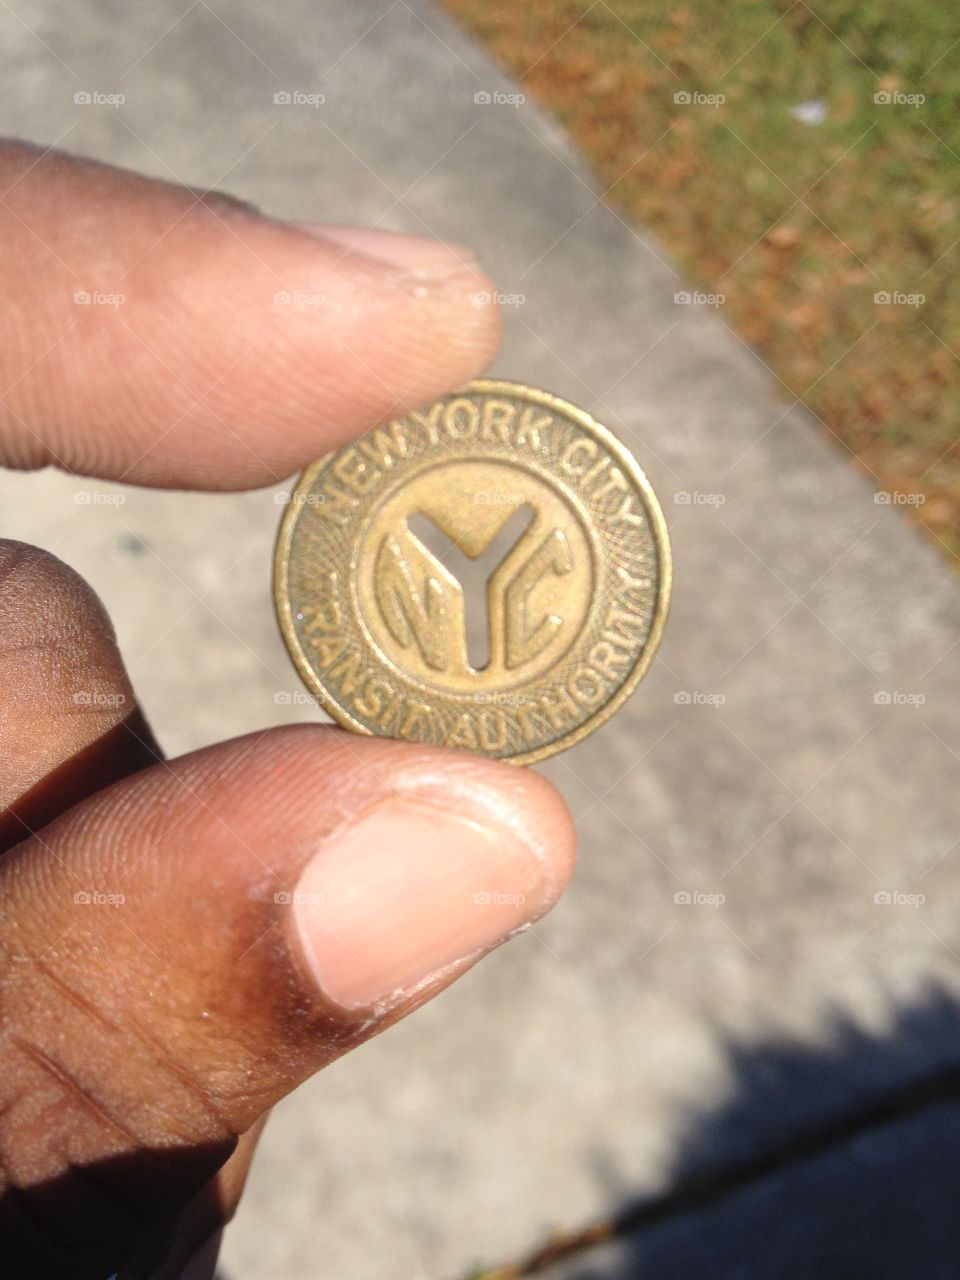 NYC Transportation Coin 